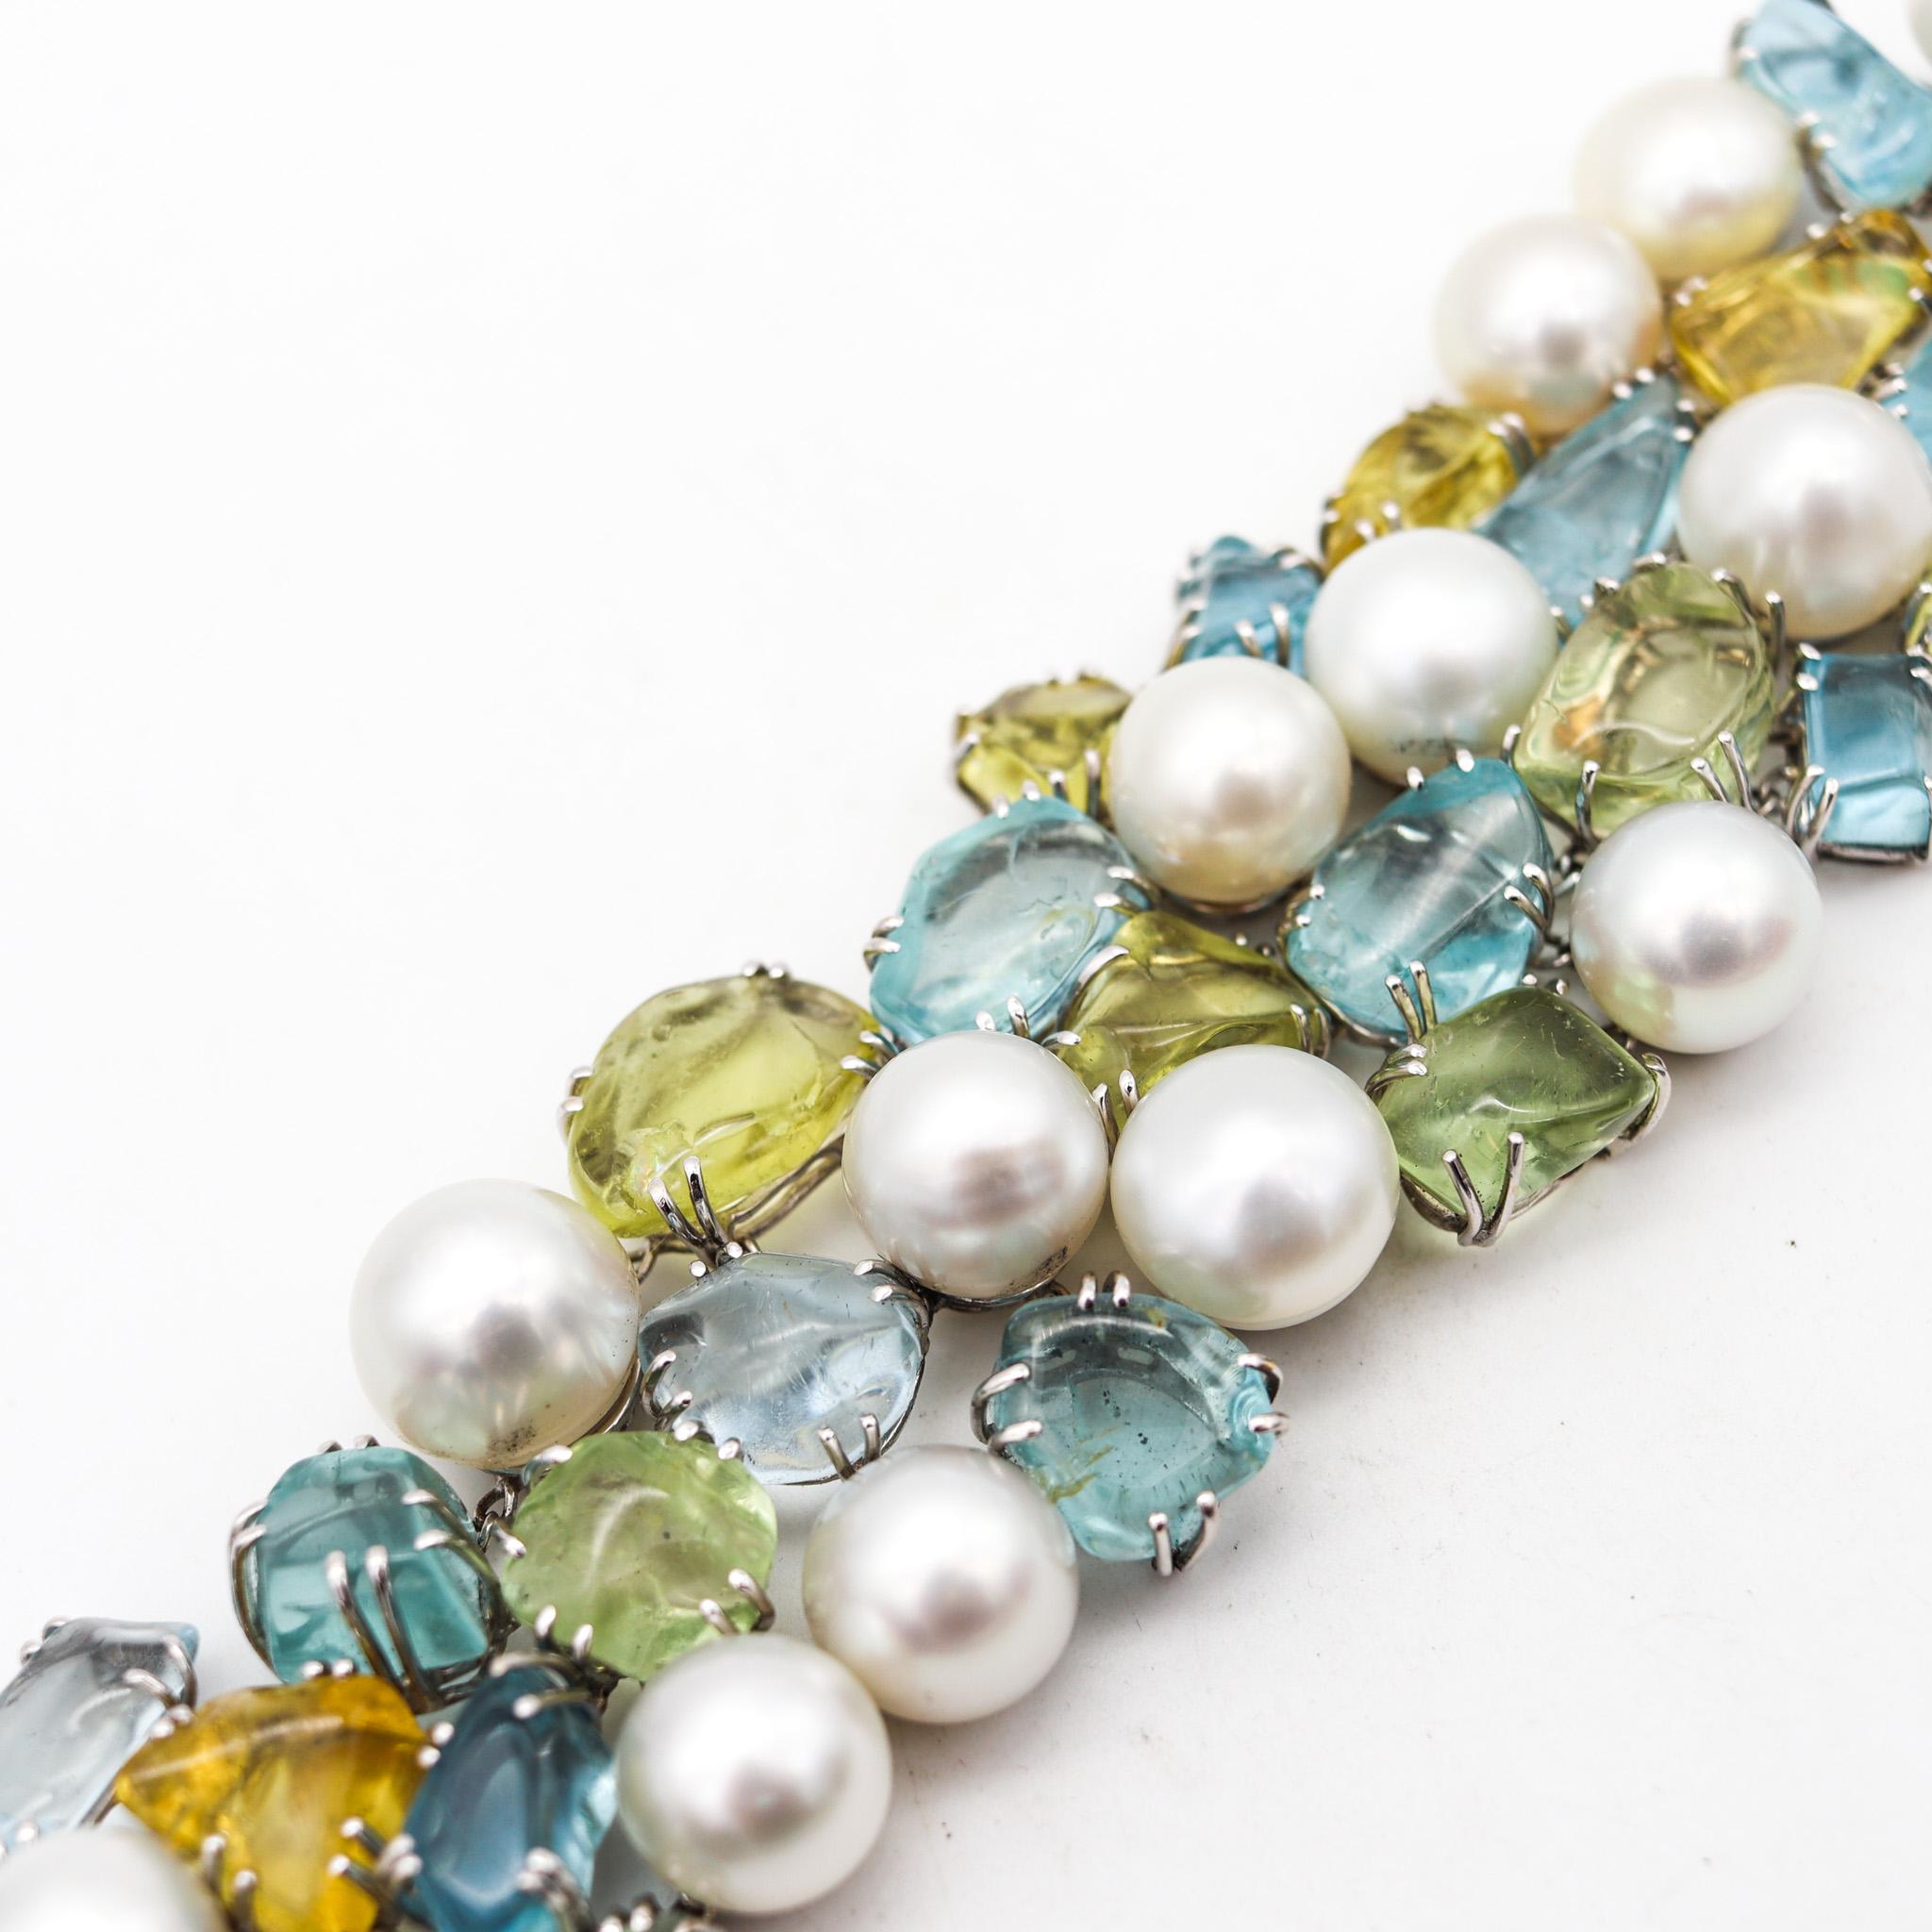 Cabochon Salavetti Pearls Bracelet In 18Kt White Gold With 108 Ctw Aquamarines And Beryl For Sale